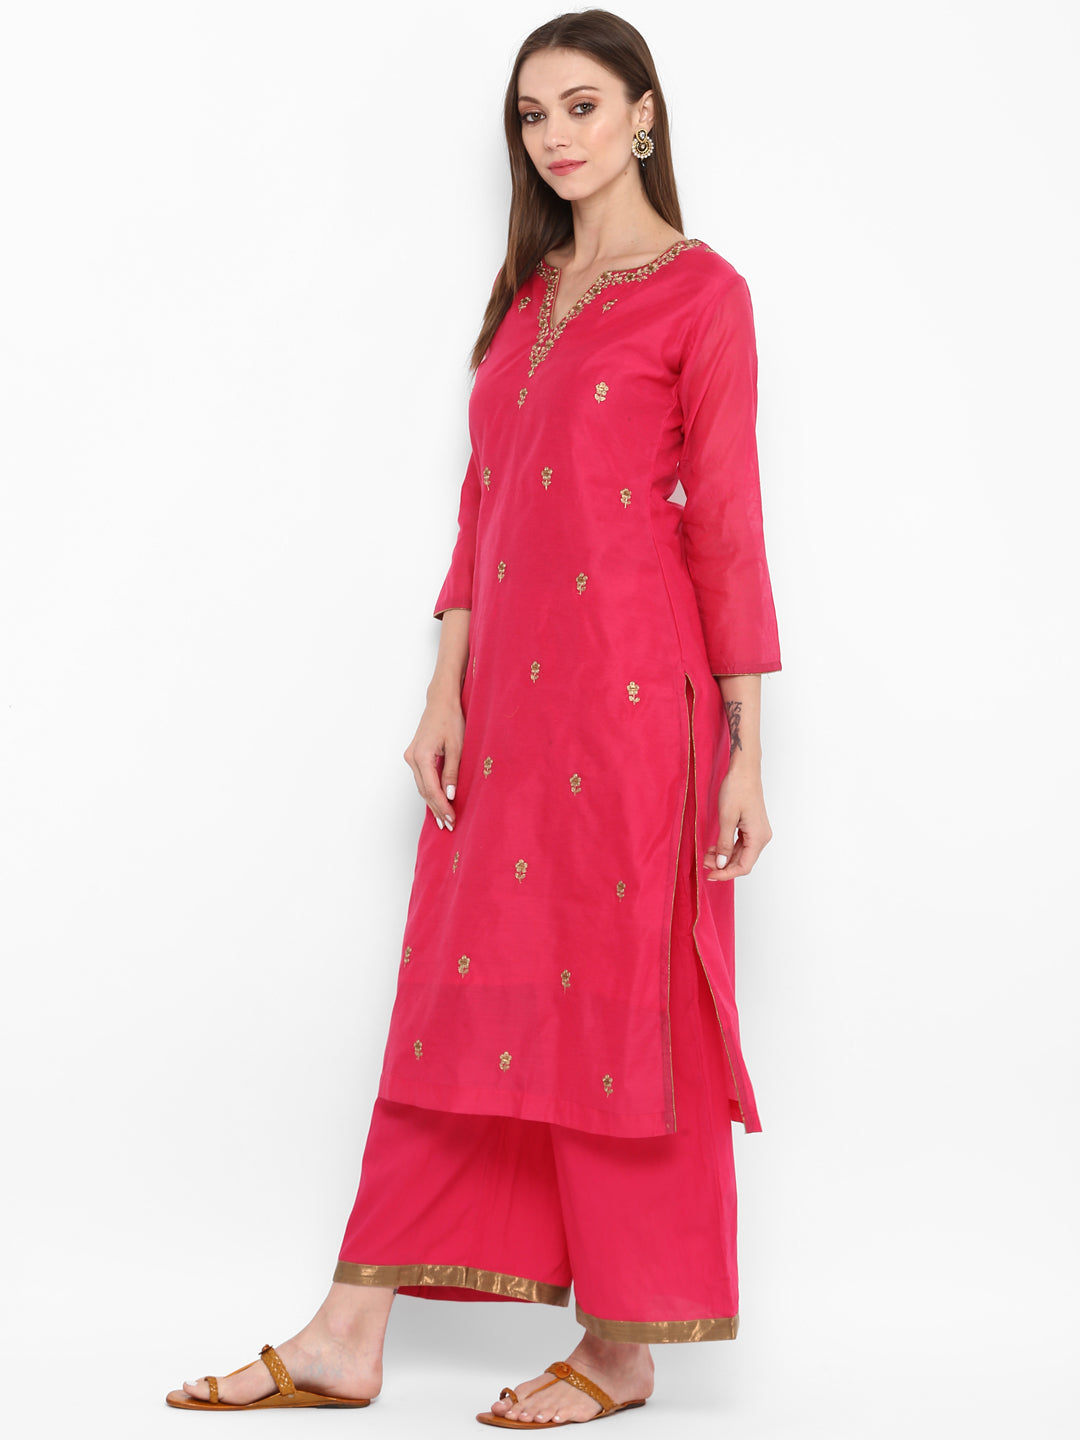 Women's Pink And Golden Embroidered Kurta With Palazzos - Bhama Couture